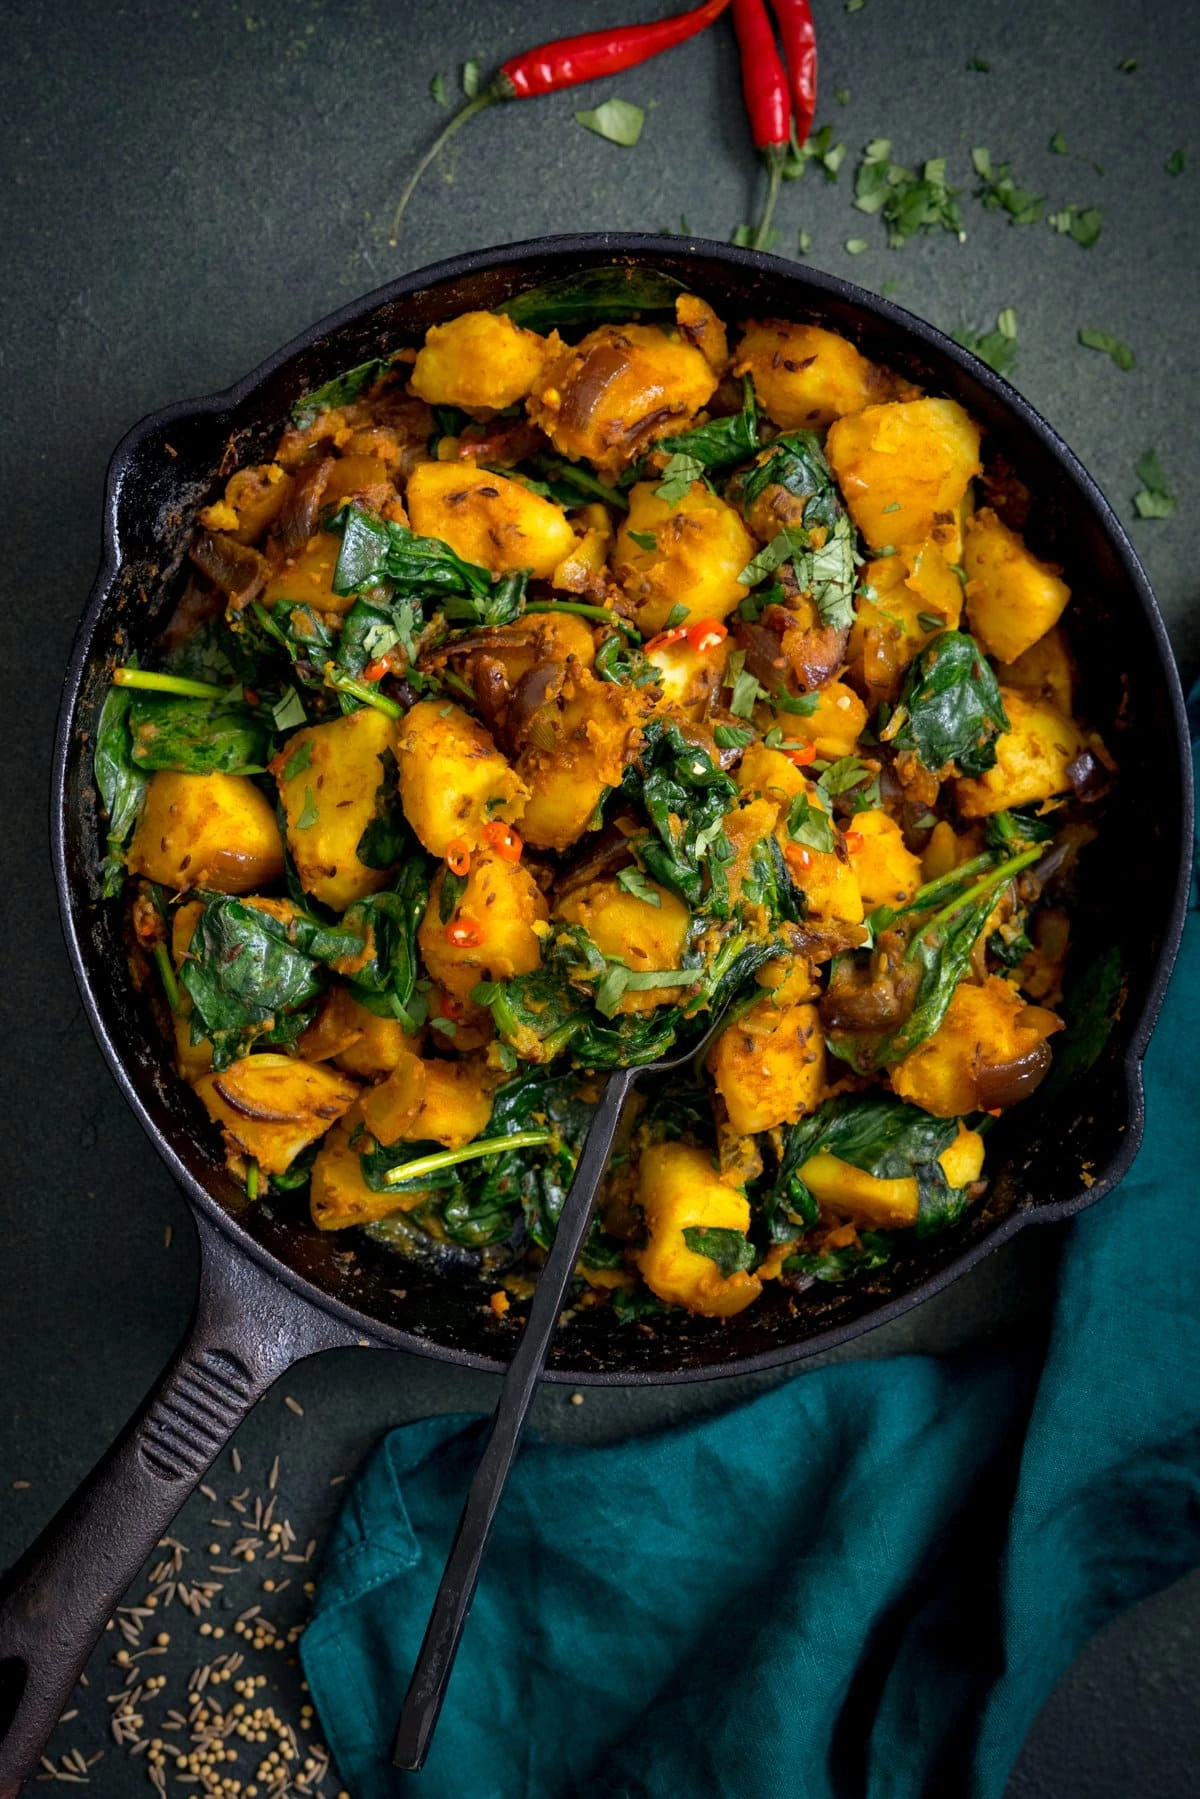 A spoonful of saag aloo being taken from a pan. The pan is on a dark green background.